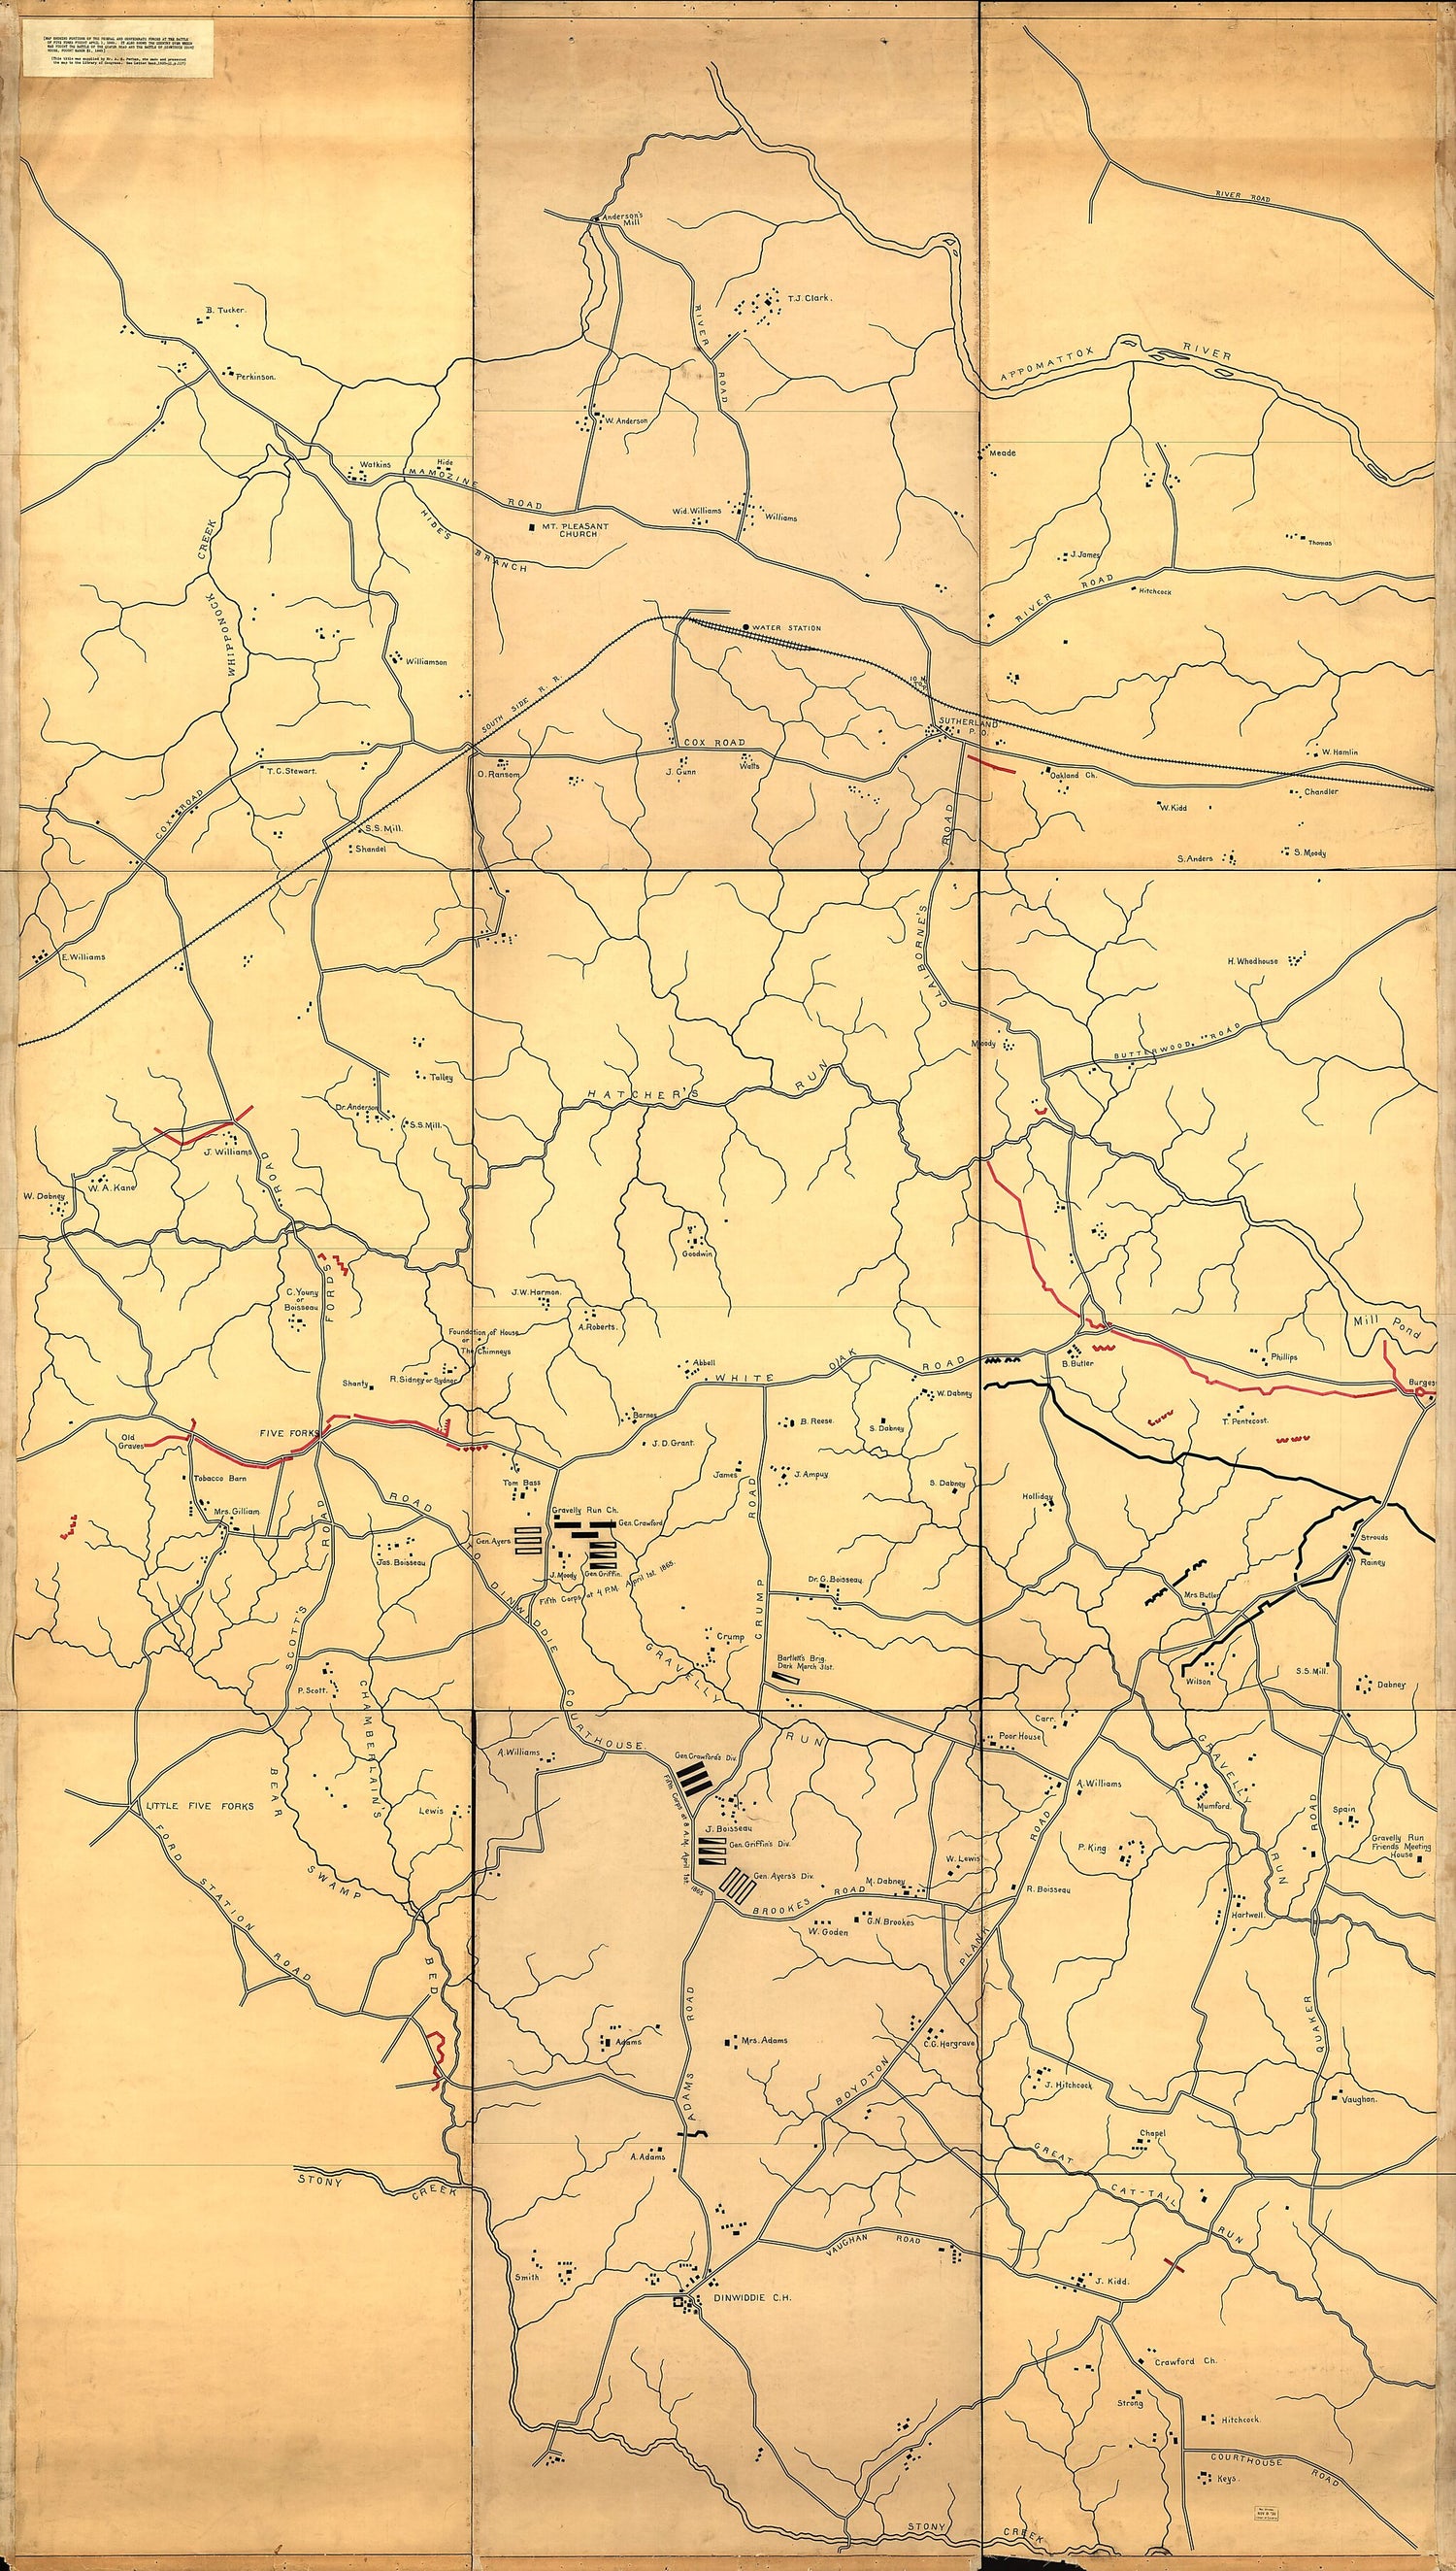 This old map of Map Showing Portions of the Federal and Confederate Forces at the Battle of Five Forks, Fought April 1, from 1865 : It Also Shows the Country Over Which Was Fought the Battle of Quaker Road and the Battle of Dinwiddie Court House, Fought 